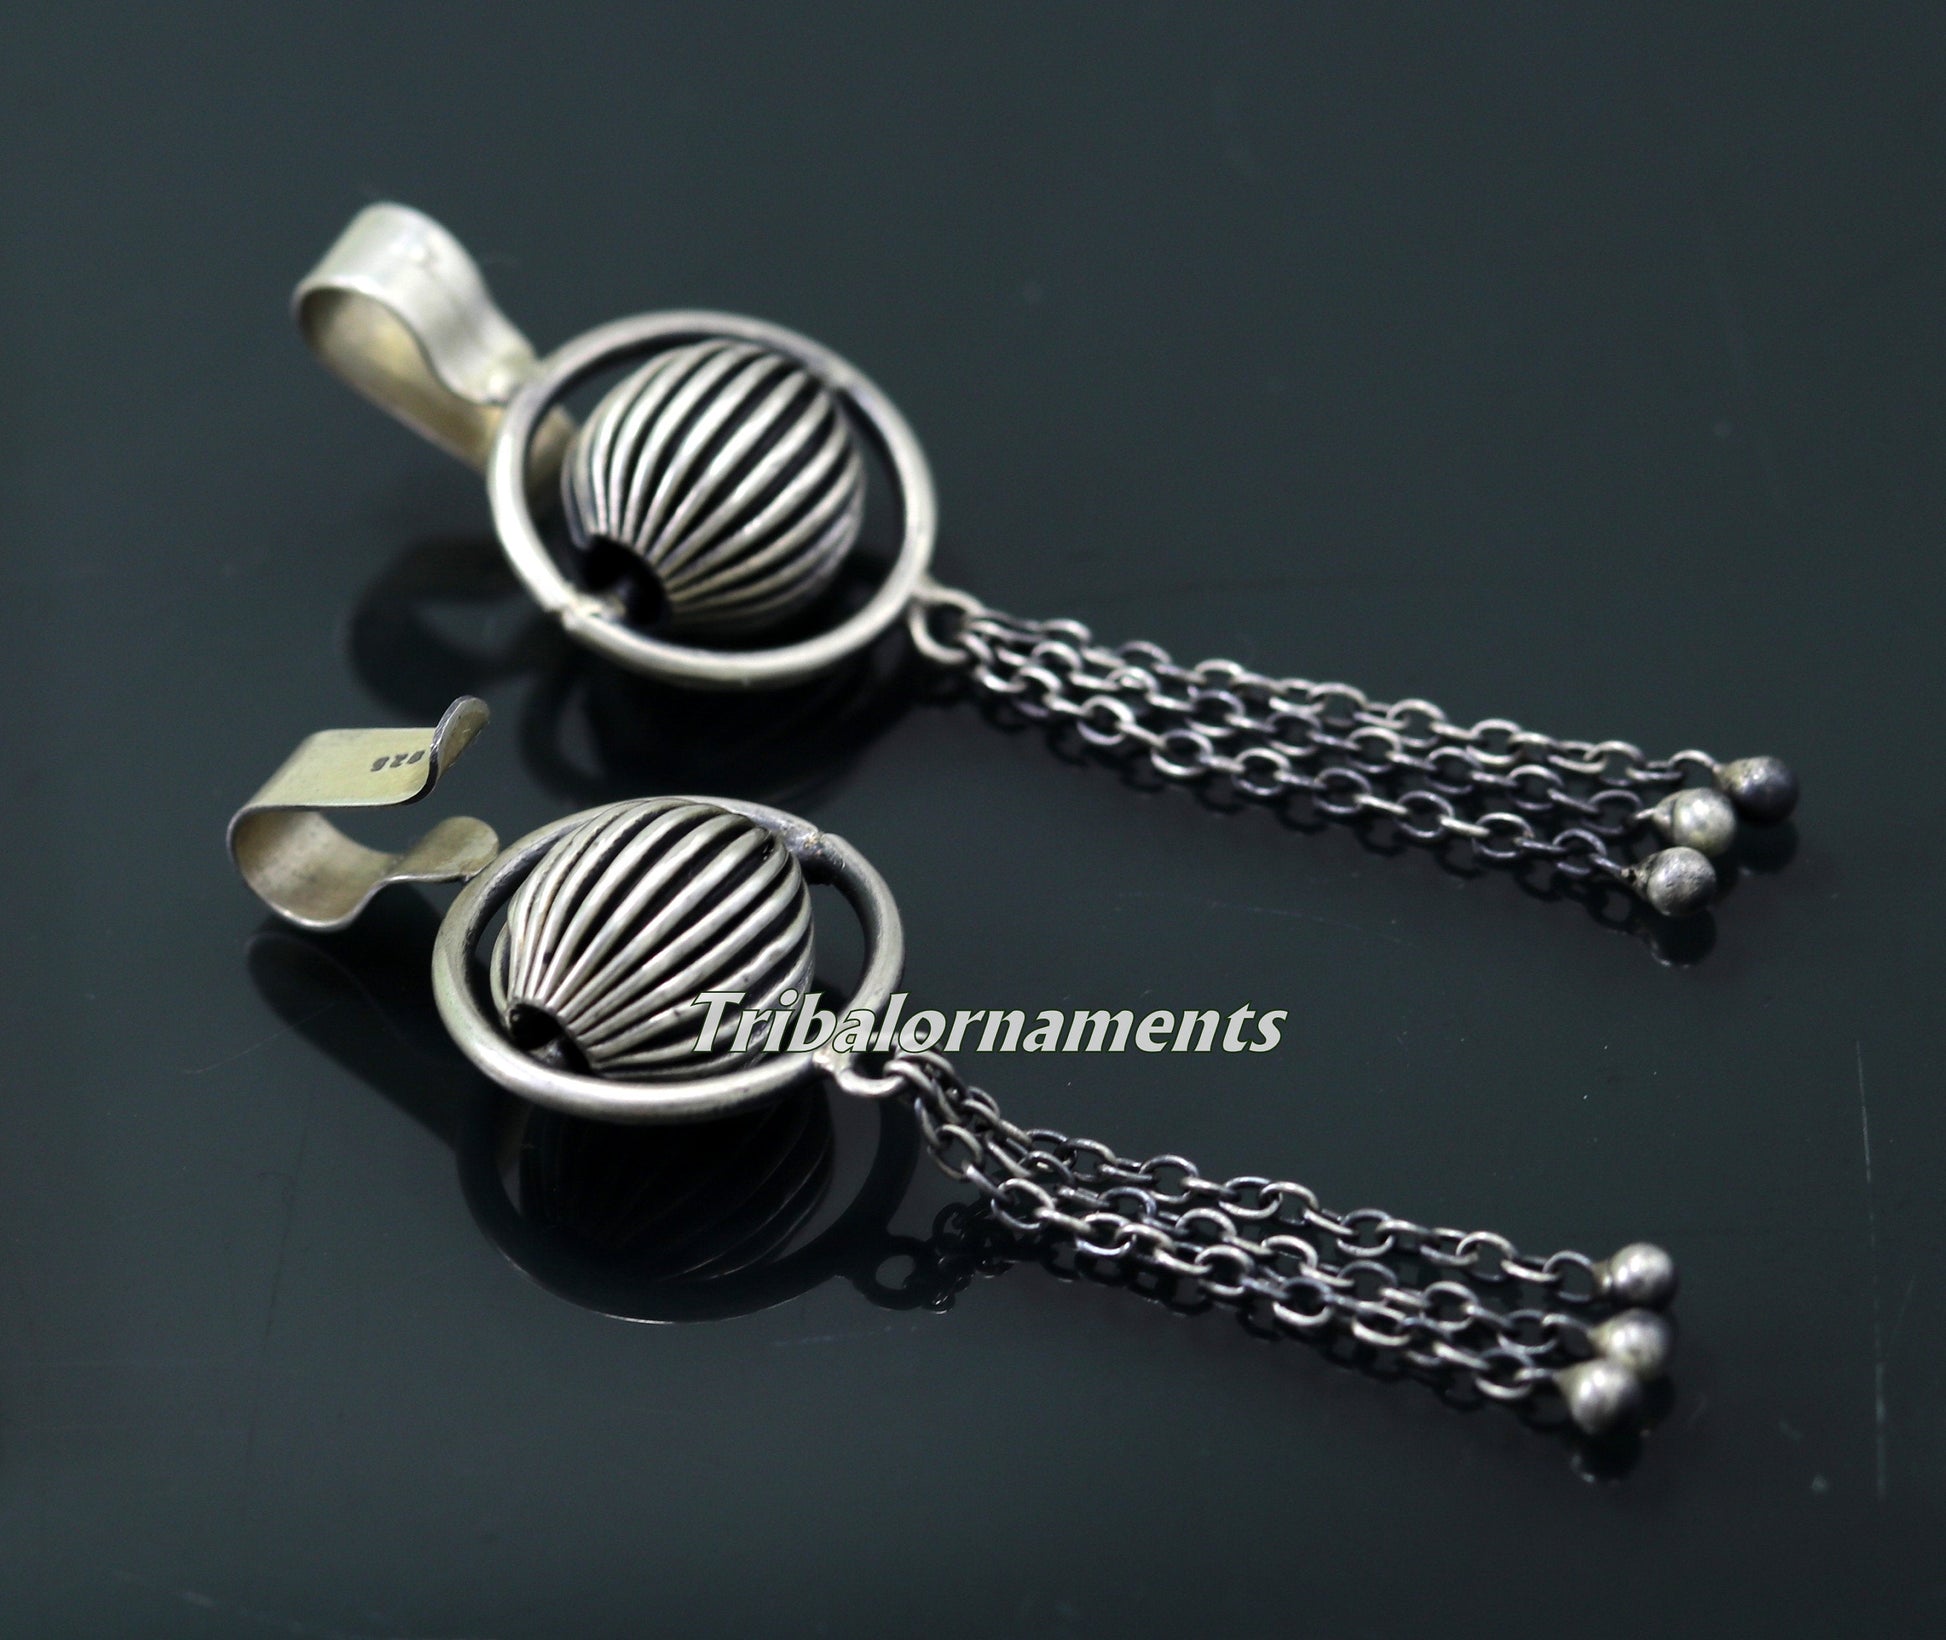 Vintage antique design handmade 925 sterling silver awesome ear clip earring ear plug upper earring jewelry ,tribal jewelry india s846 - TRIBAL ORNAMENTS